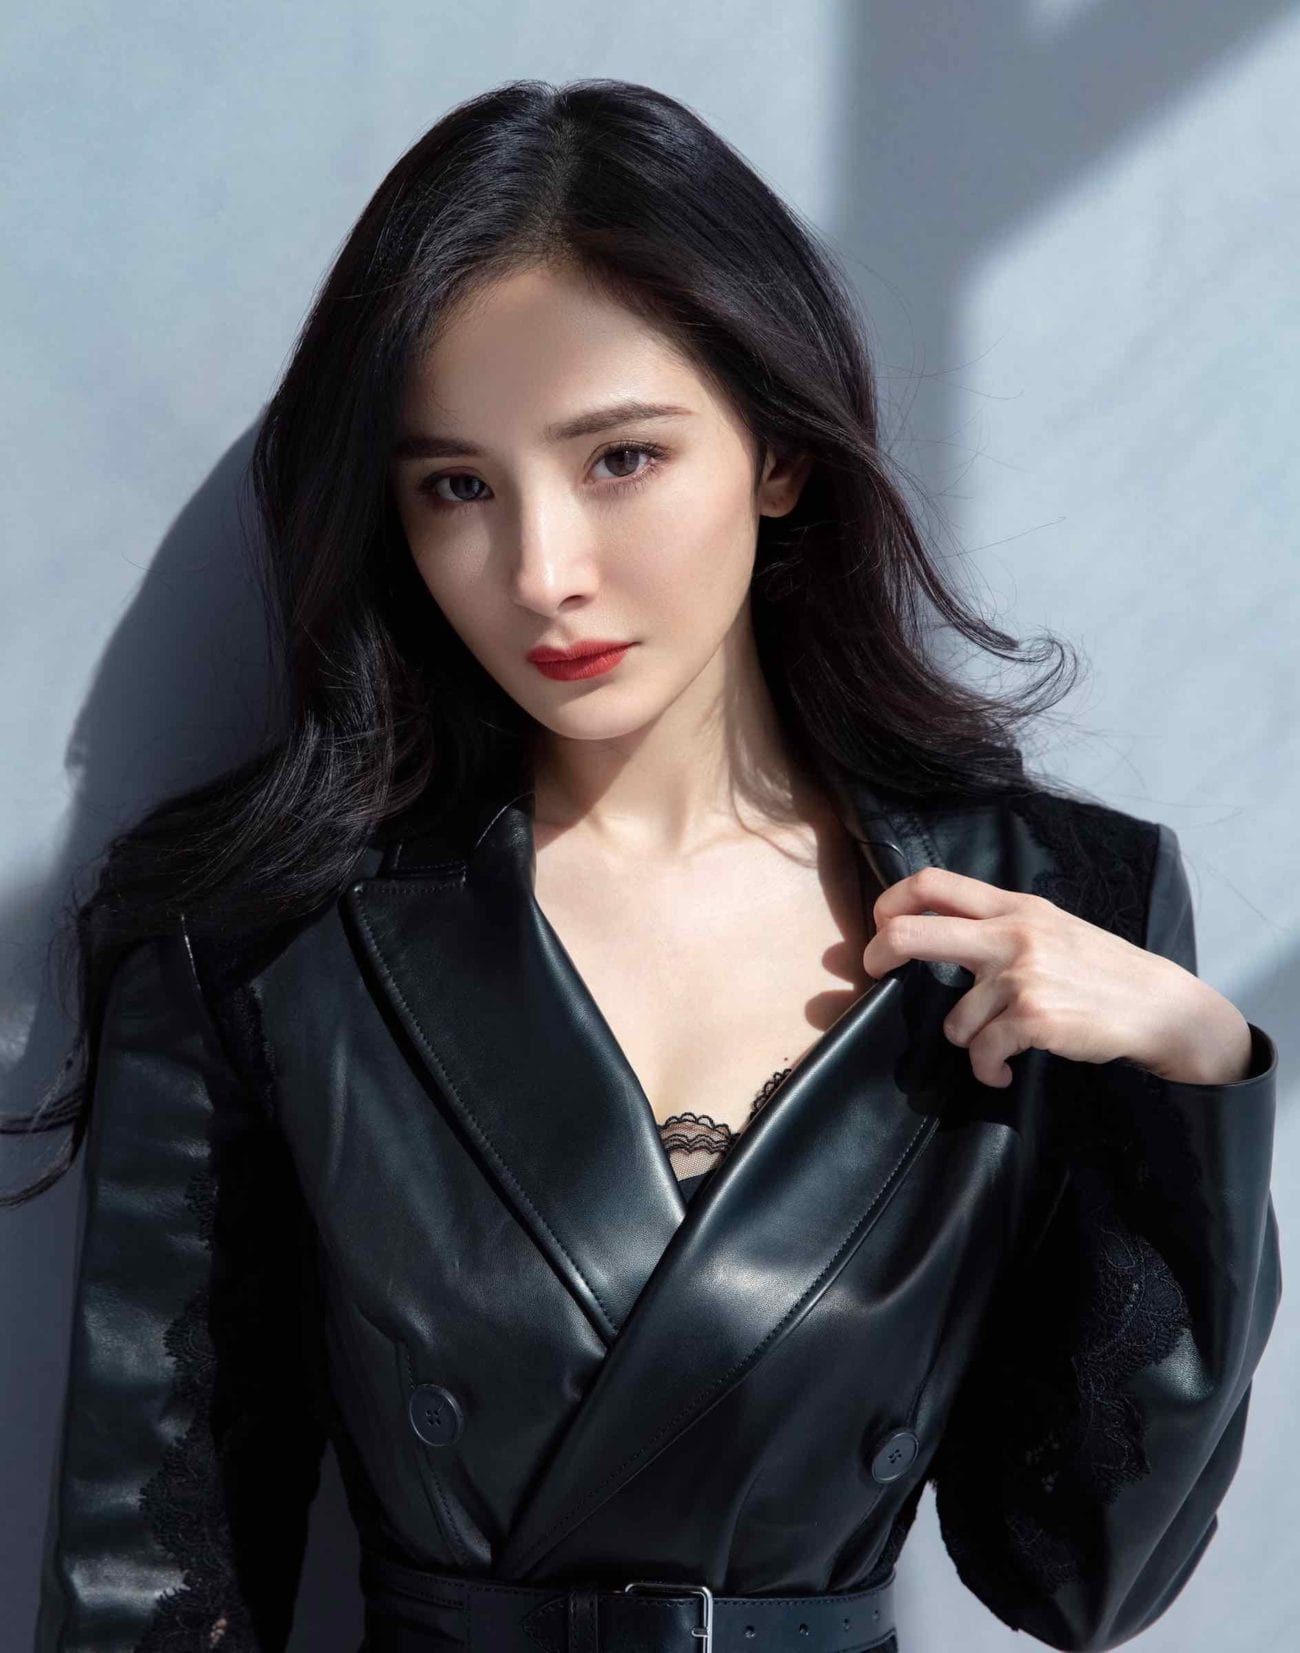 We couldn’t help but fall for Yang Mi. We’re highlighting some of Yang Mi’s most influential roles to date. Yang Mi is a force to be reckoned with.